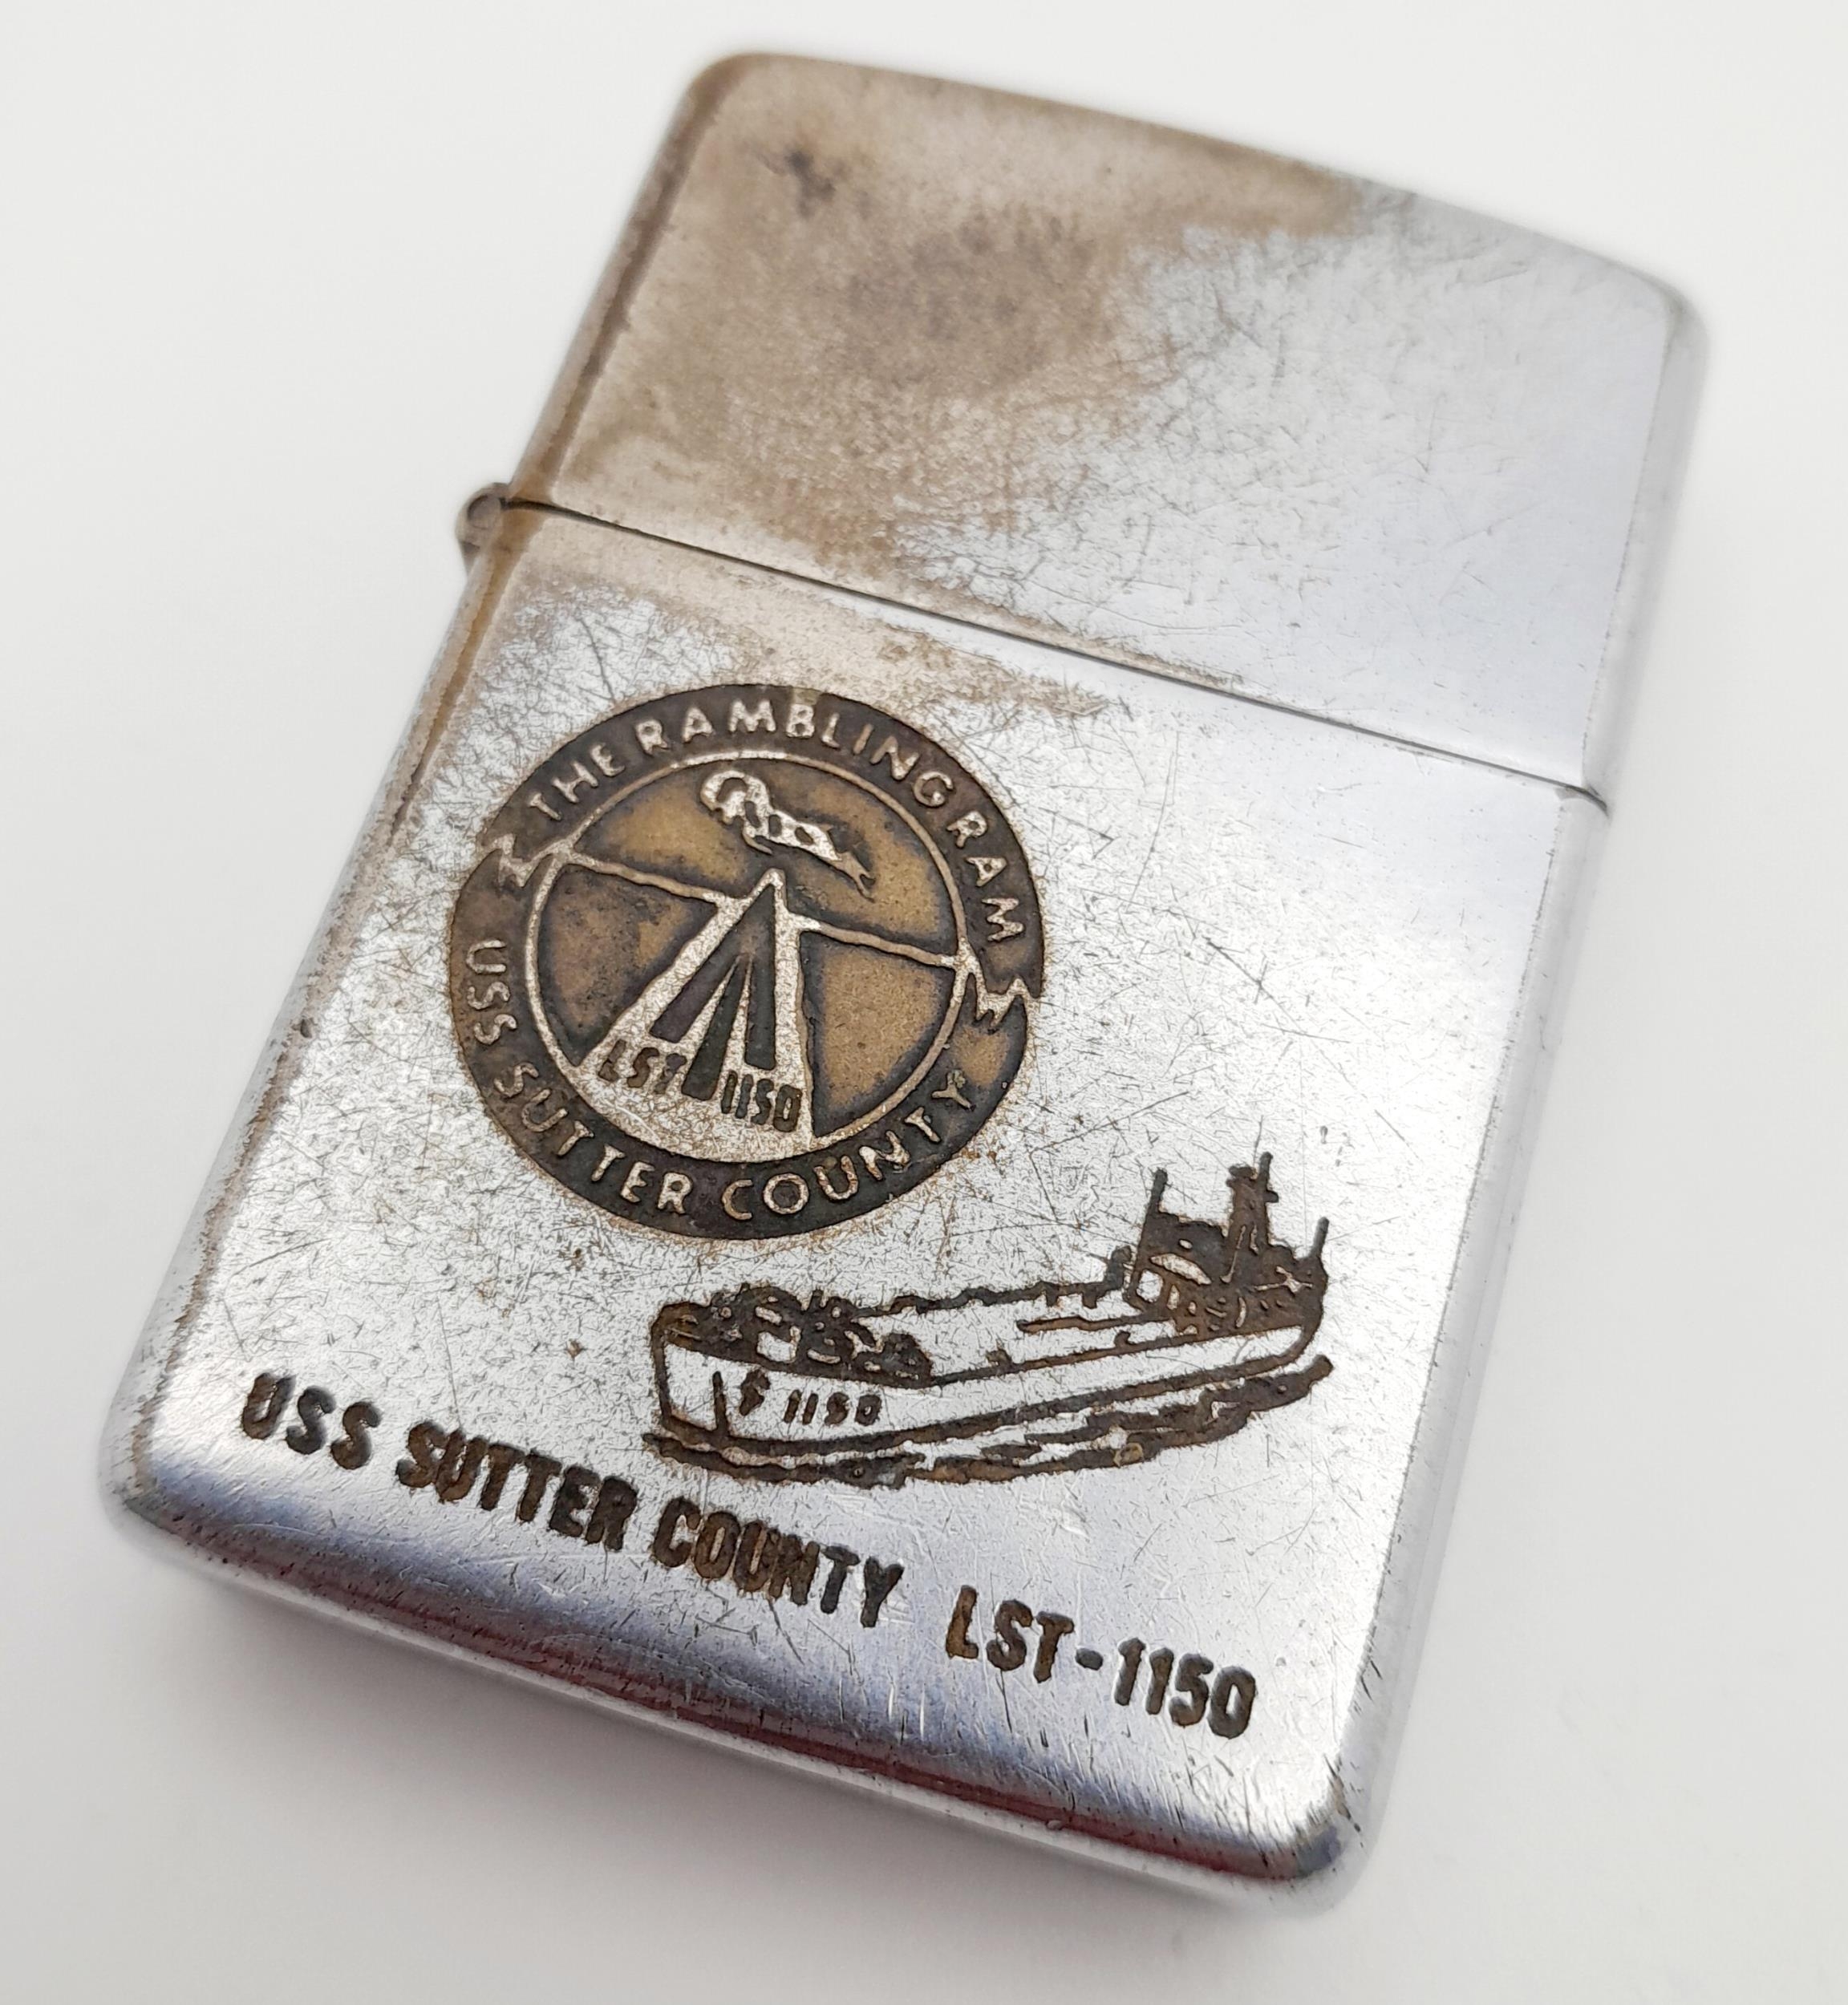 Vietnam Era Zippo Date Coded 1966. Etched to the USS Sutter County LST-1150. This Tank Landing - Image 2 of 8